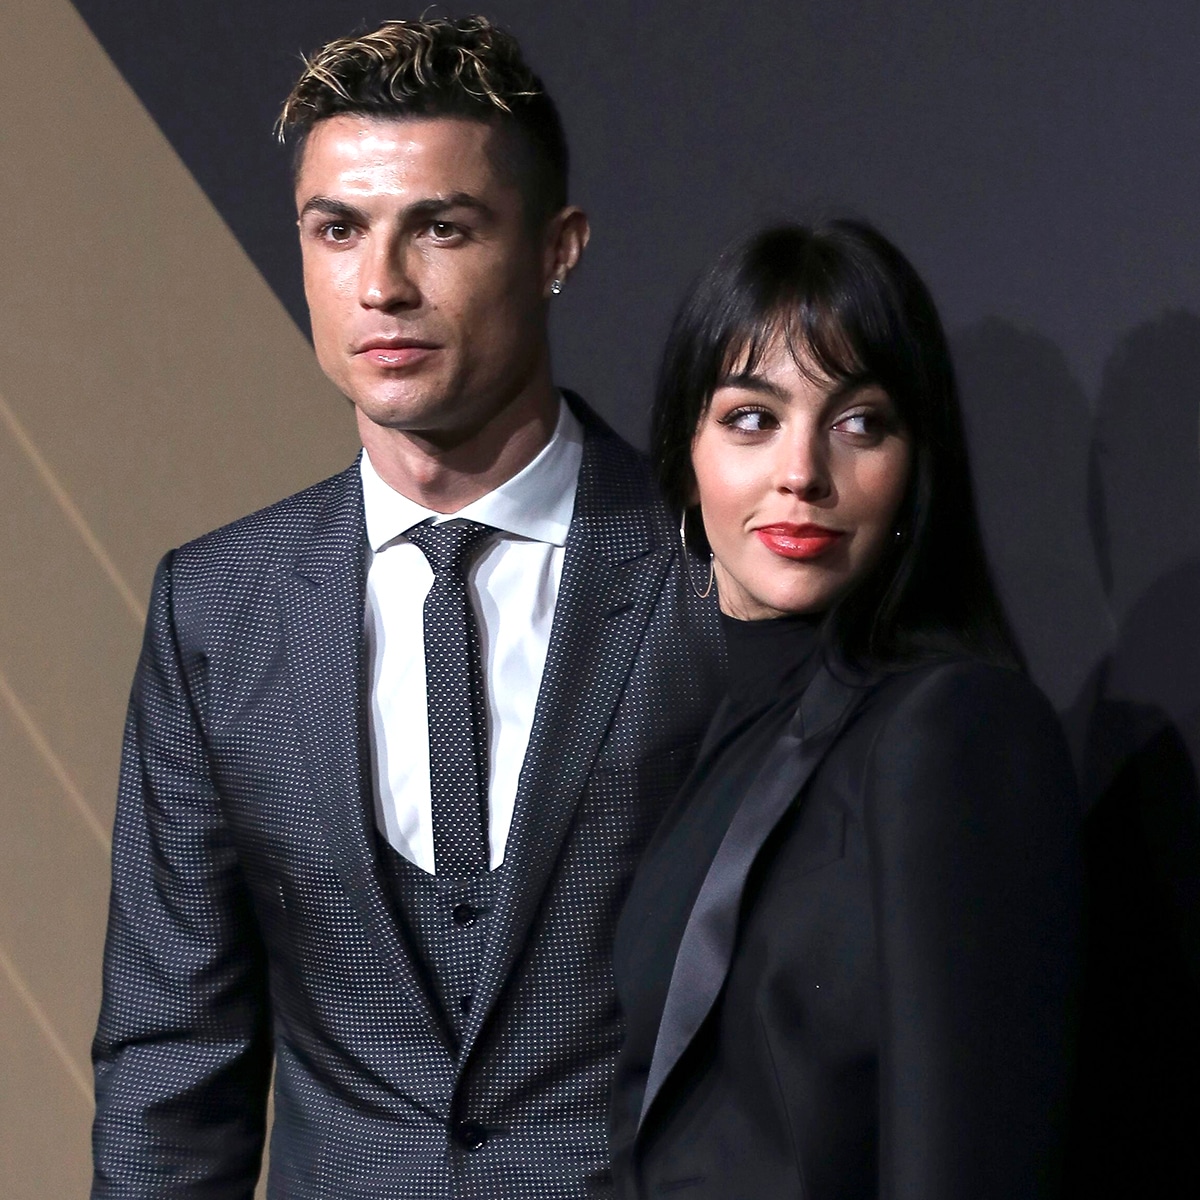 Georgina speaks up about the 'end' of her relationship with Ronaldo.